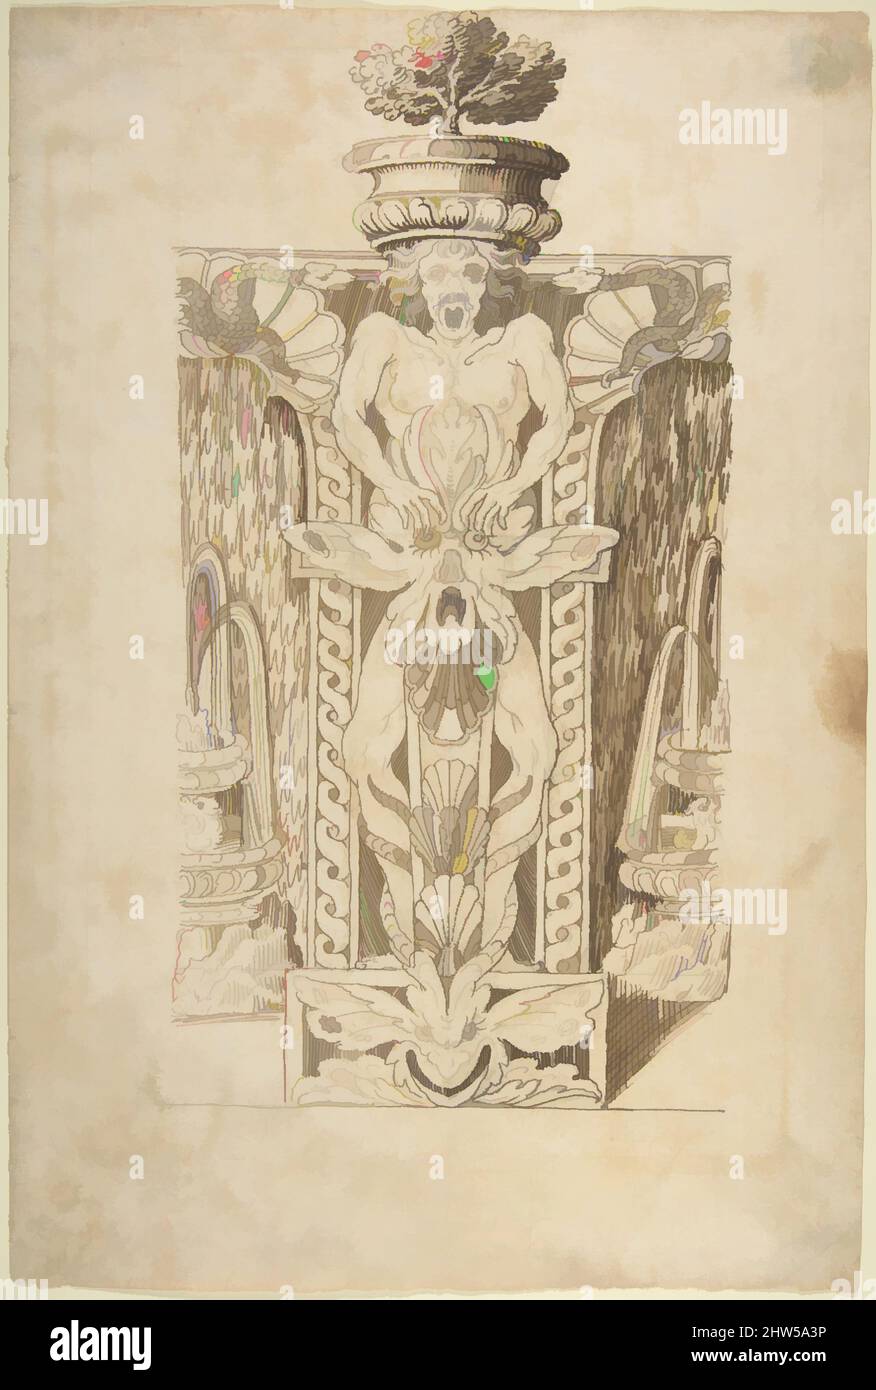 Art inspired by Design for a Wall Fountain, 1550–1620, Pen and brown ink, brush and light brown wash, over lead point, with ruled construction, 14 5/8 x 9 13/16 in. (37.2 x 25 cm), Drawings, Anonymous, Italian, Lombard, 16th century, Classic works modernized by Artotop with a splash of modernity. Shapes, color and value, eye-catching visual impact on art. Emotions through freedom of artworks in a contemporary way. A timeless message pursuing a wildly creative new direction. Artists turning to the digital medium and creating the Artotop NFT Stock Photo